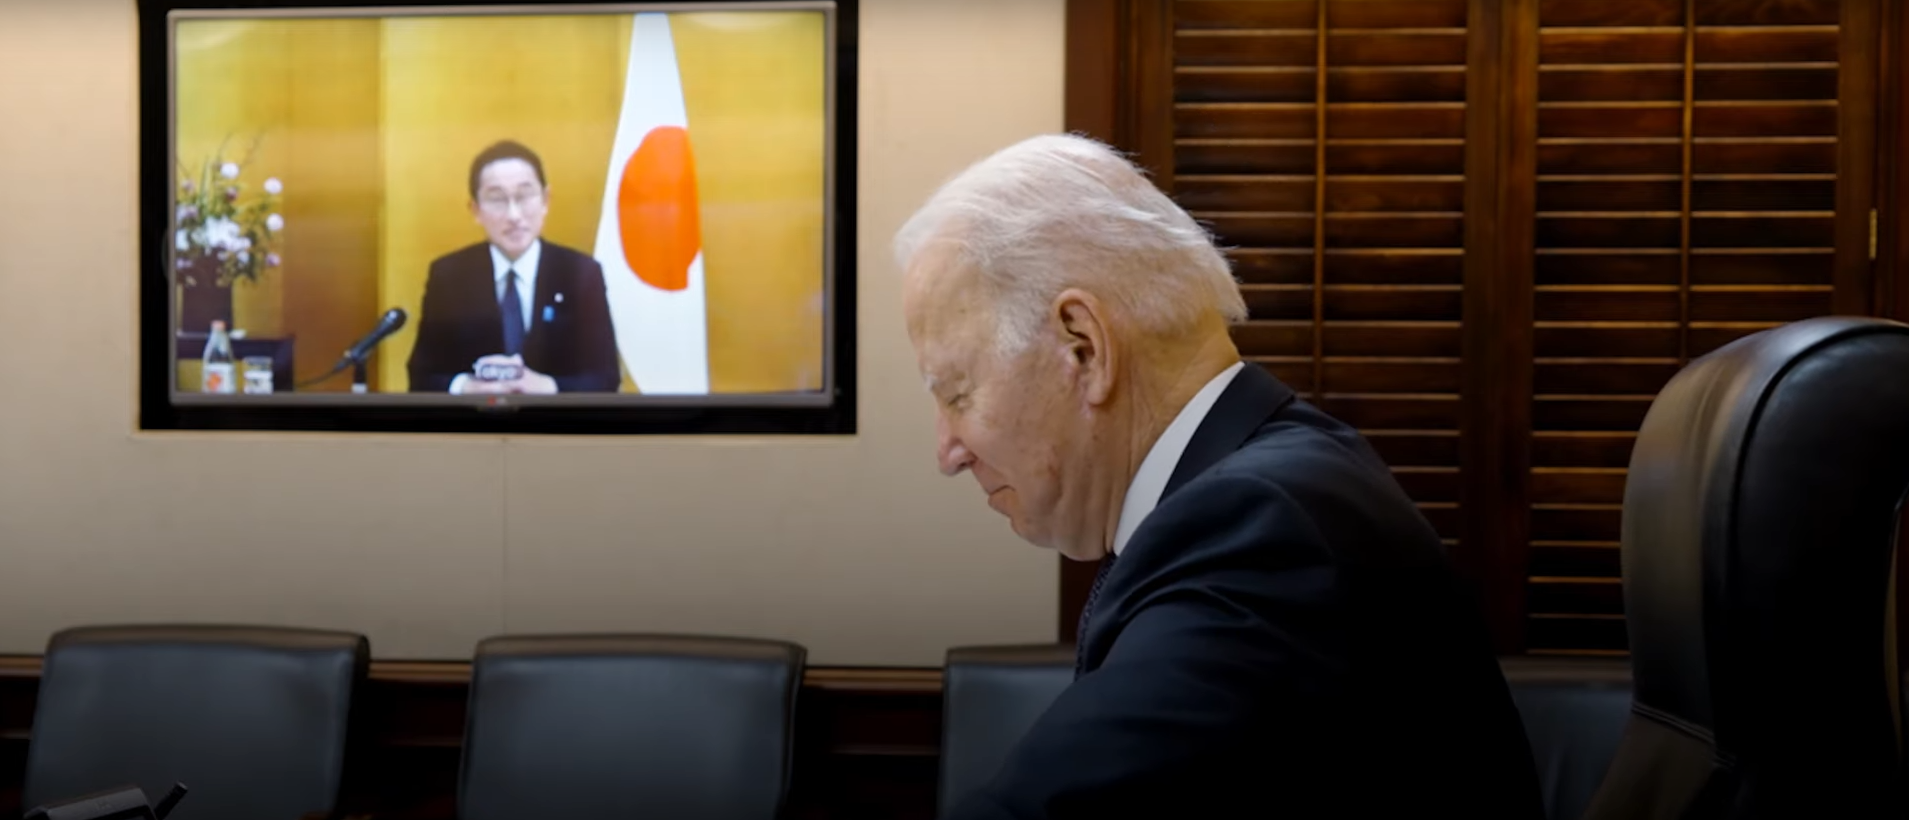 Biden White House Releases First-Ever Footage From Inside Situation Room